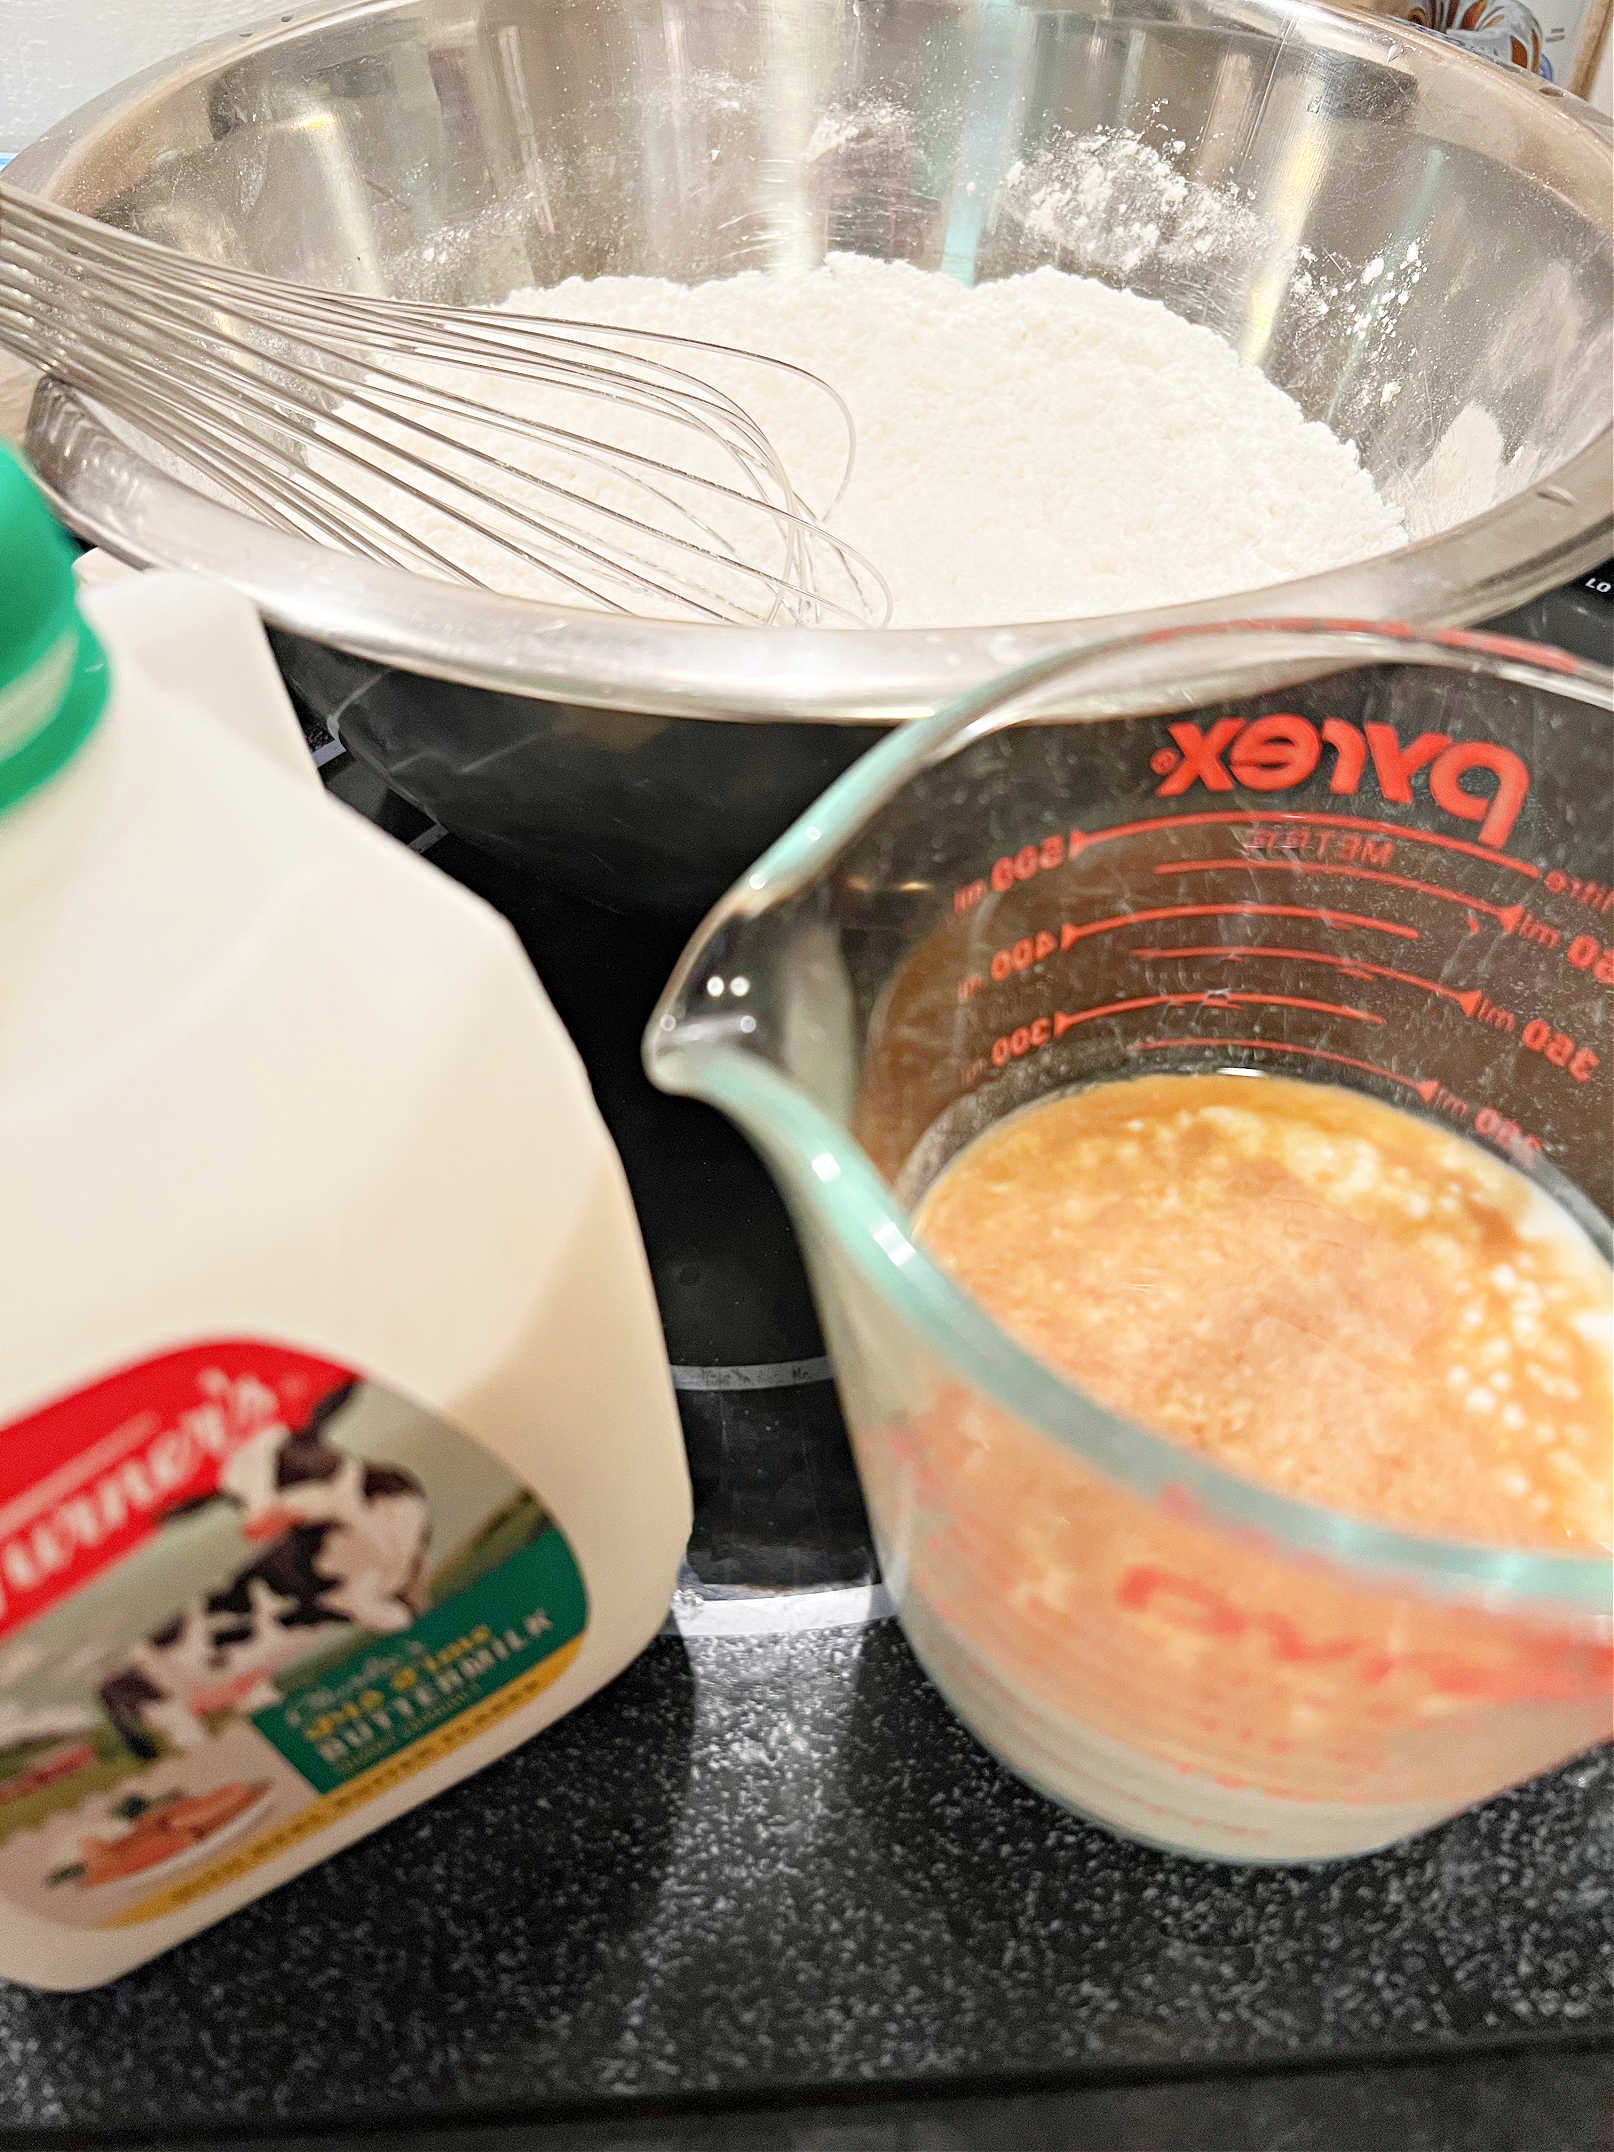 Buttermilk Mixture (measuring cup of buttermilk, vegetable oil, and flavoring)